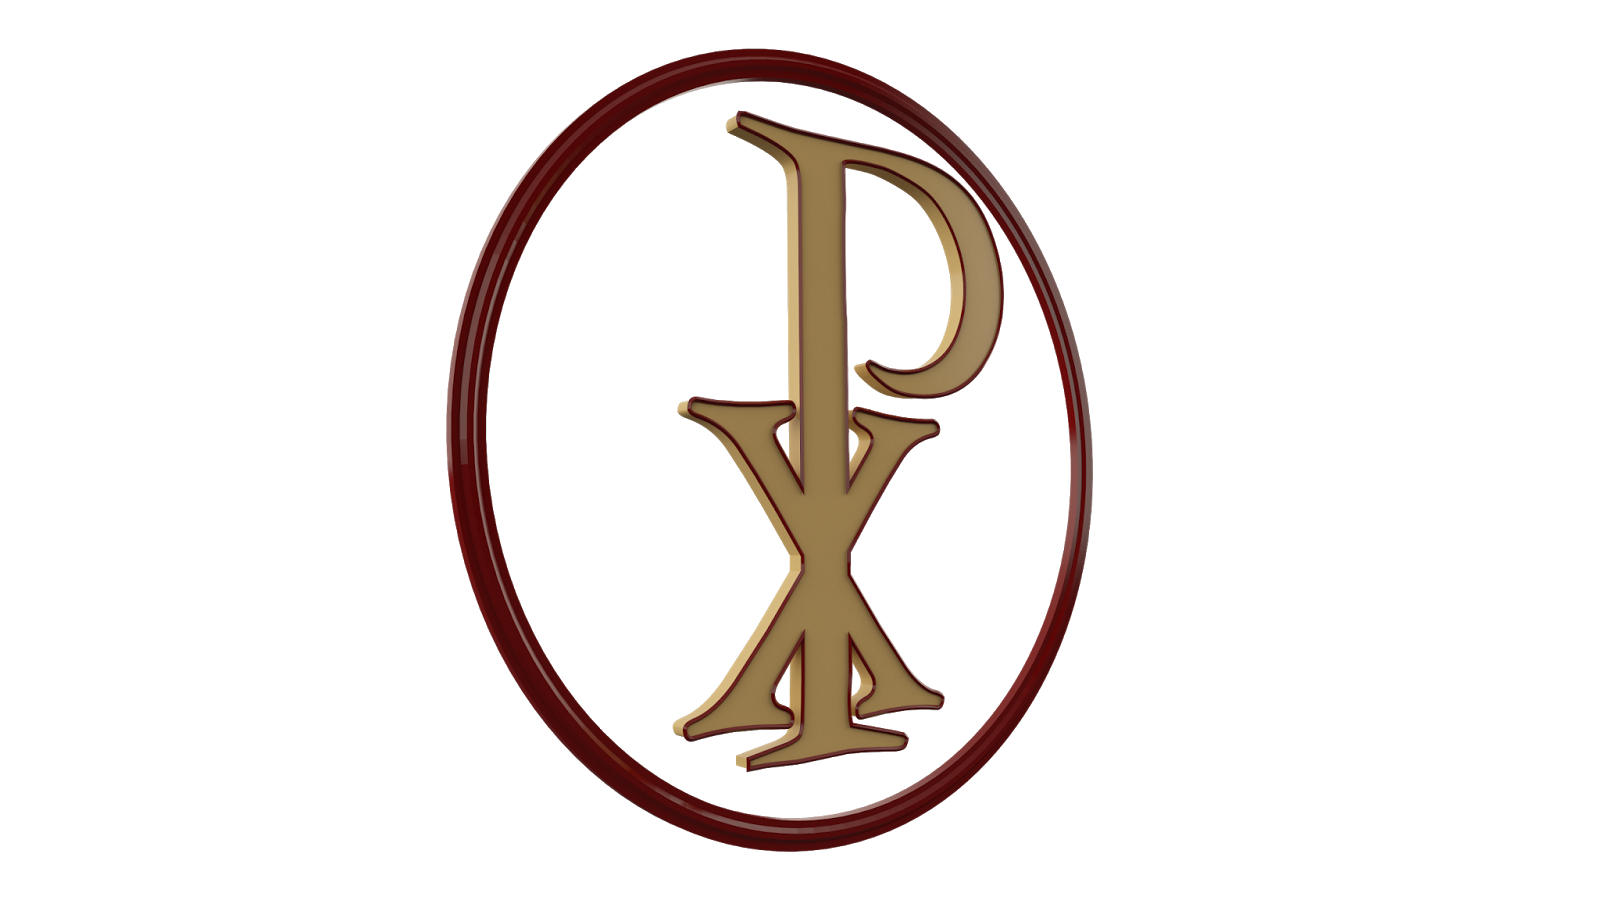 PNG PARK - High Res PNG Files: Christian Px Symbol